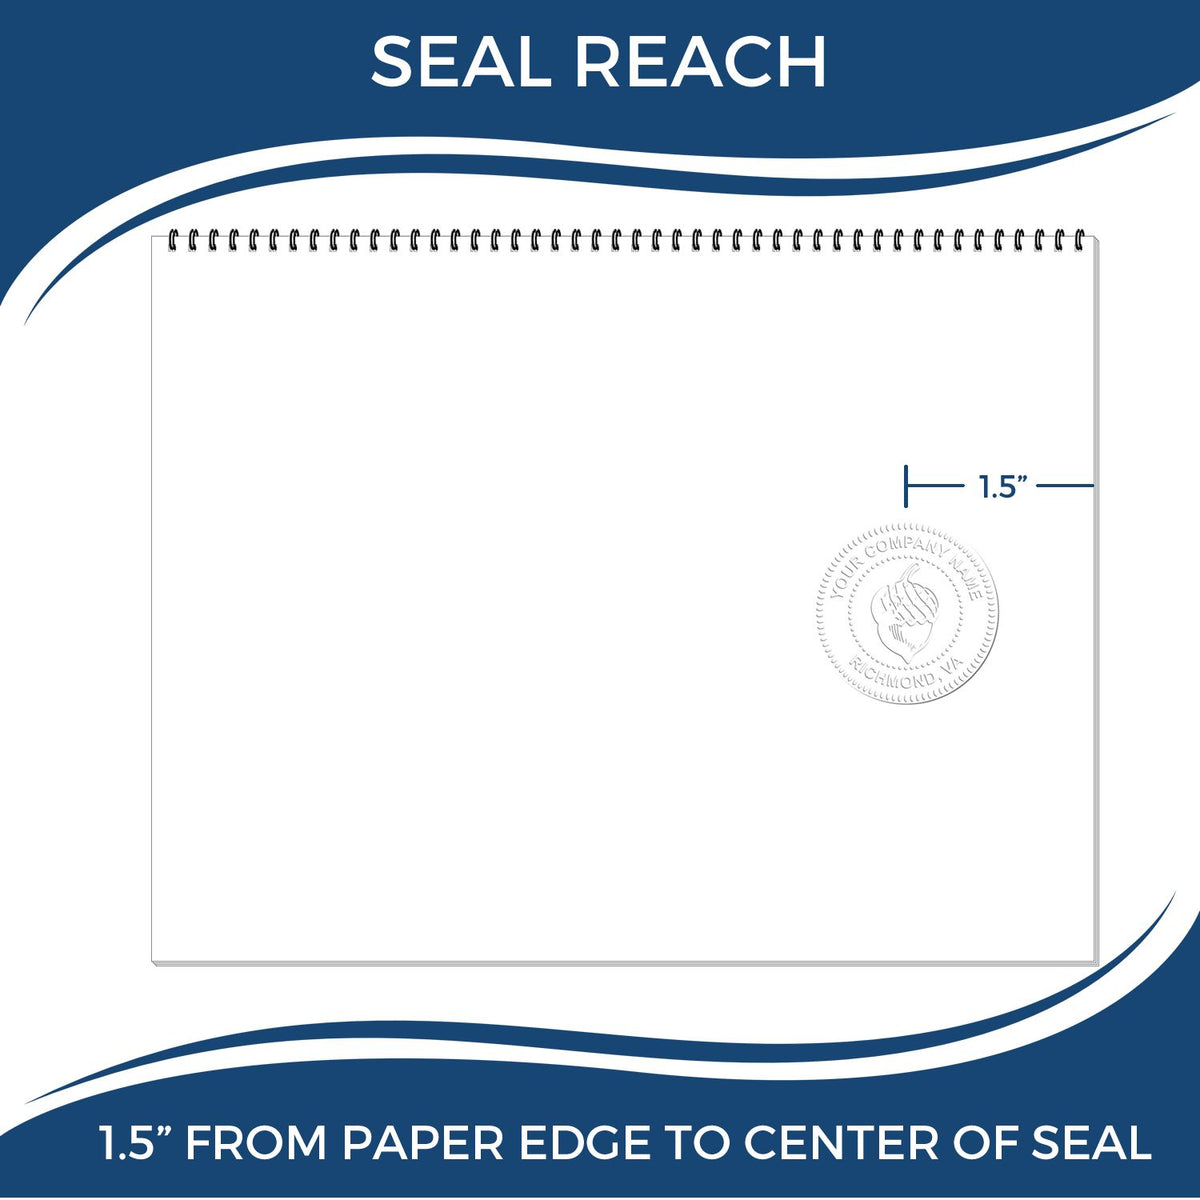 An infographic showing the seal reach which is represented by a ruler and a miniature seal image of the Hybrid Maryland Land Surveyor Seal